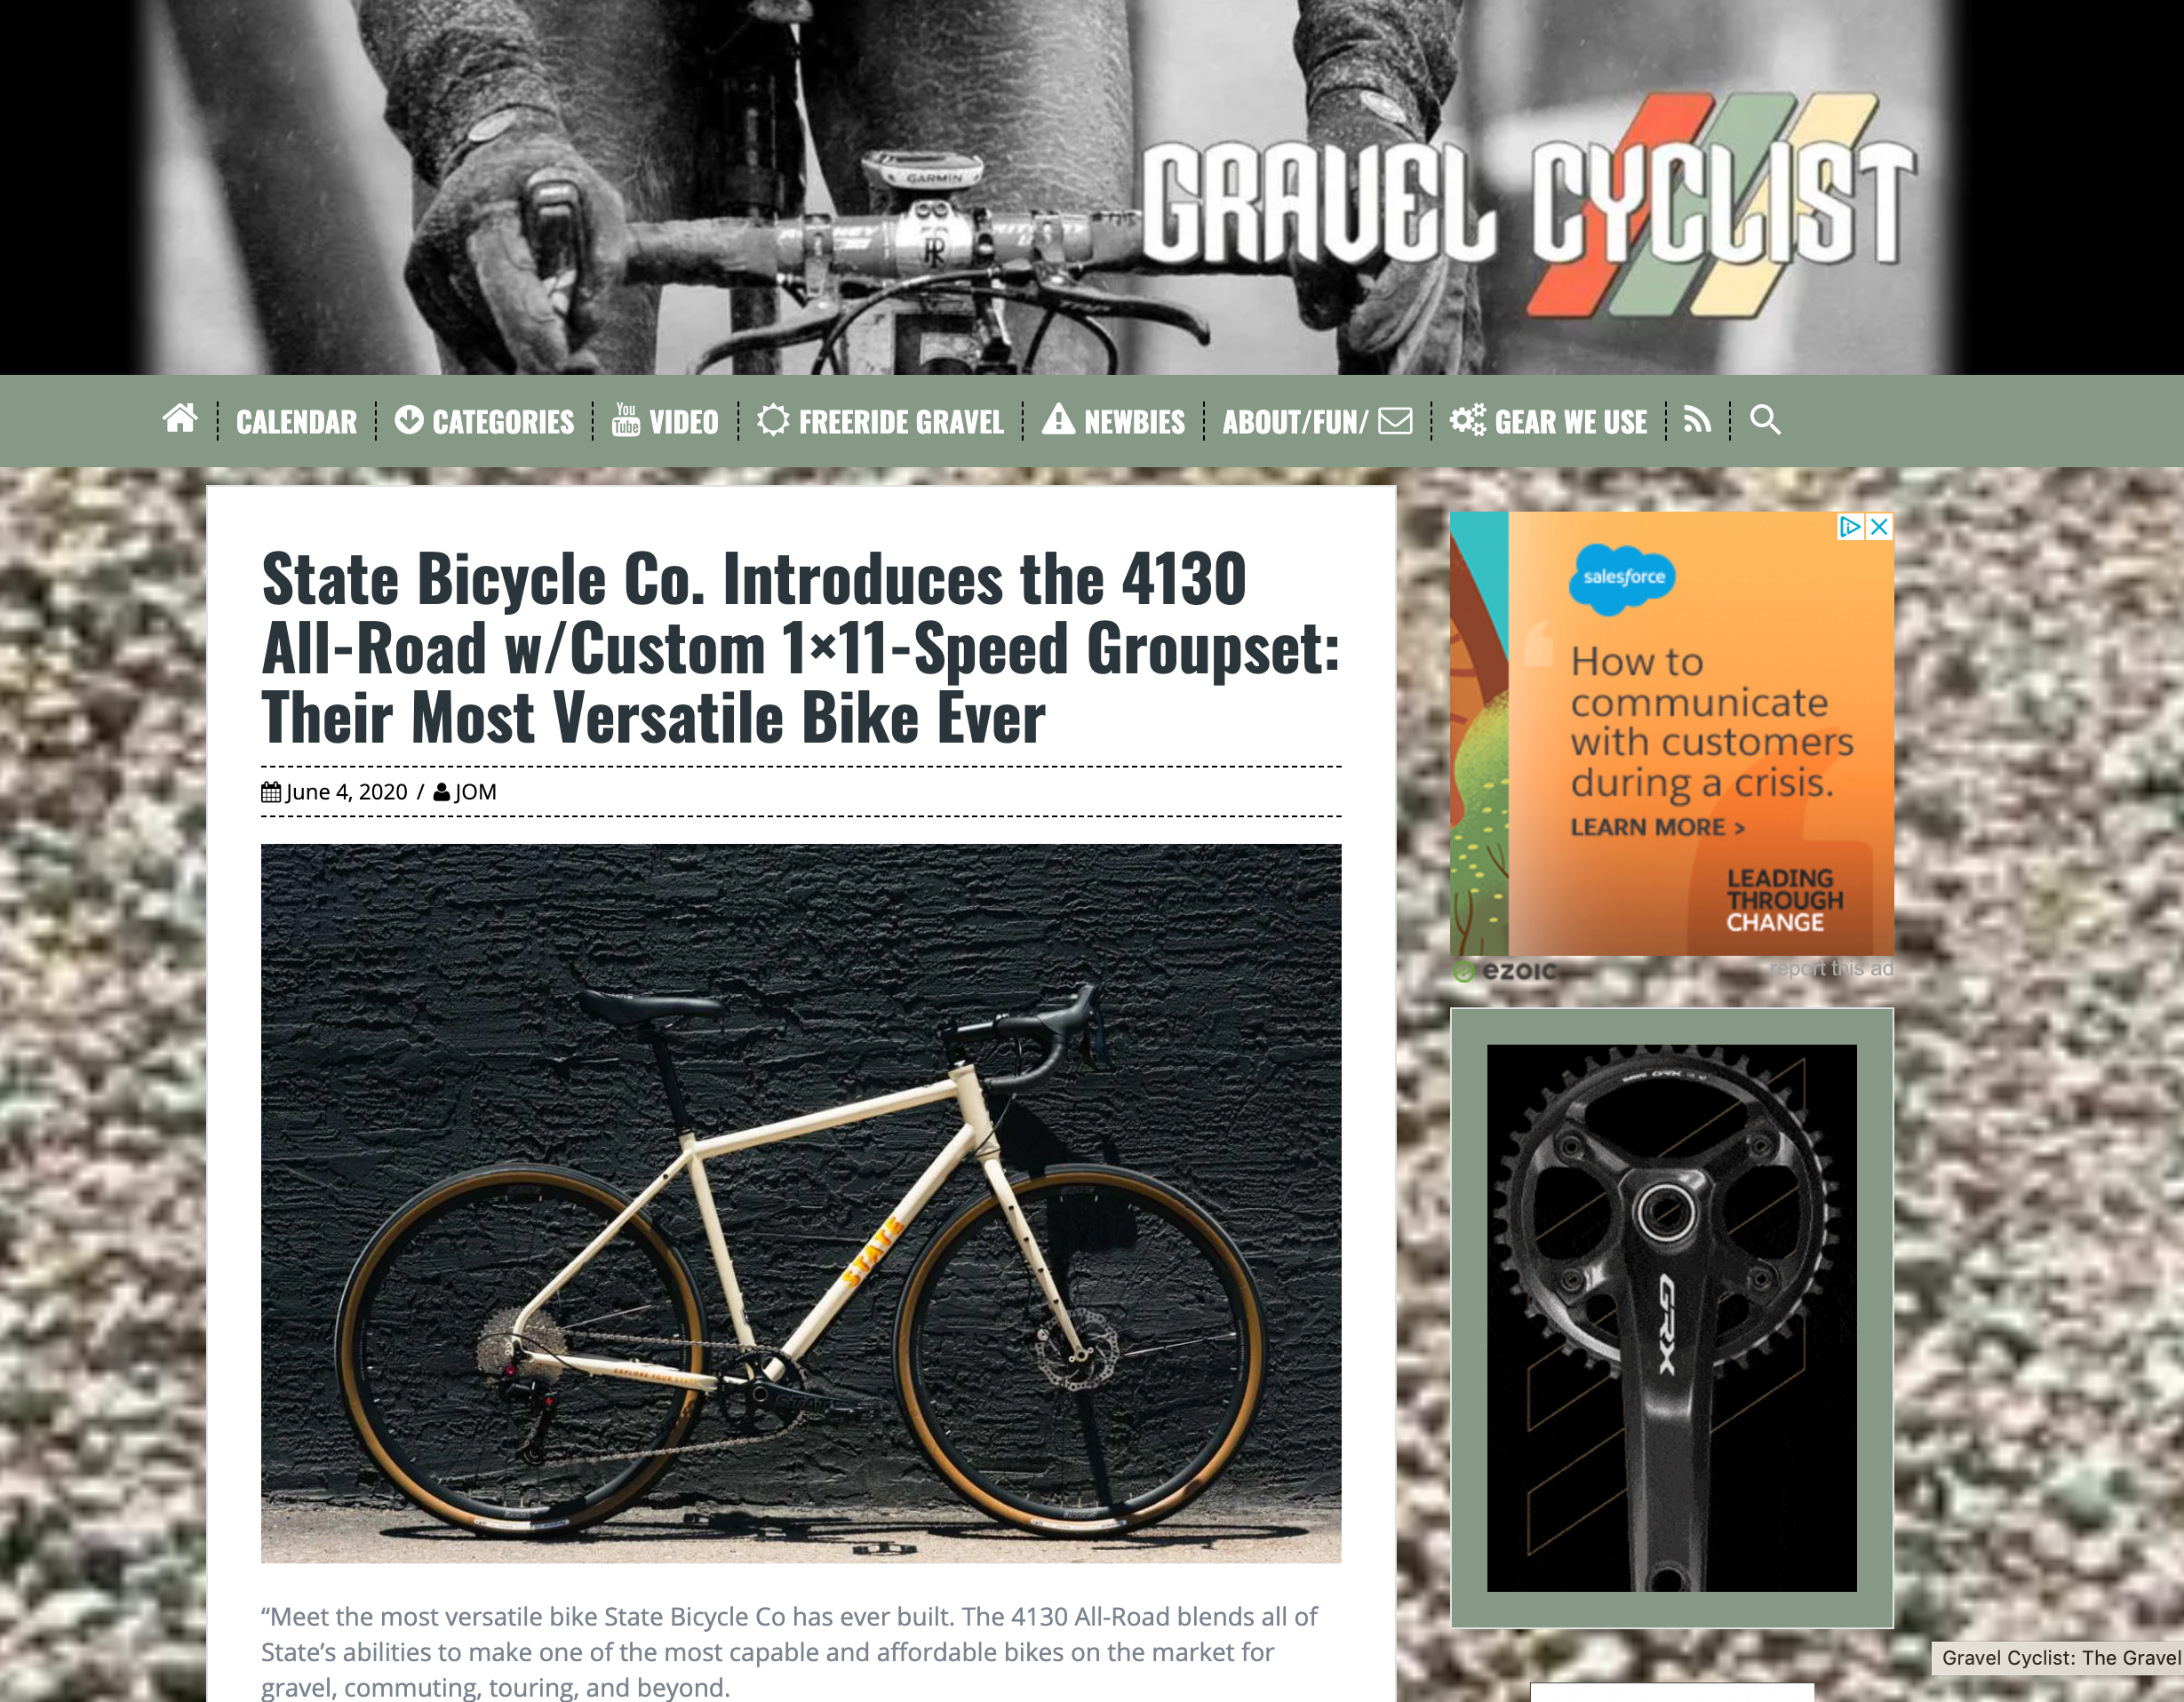 Gravel Cyclist: State Bicycle Co. Introduces the 4130 All-Road w/Custom 1×11-Speed Groupset: Their Most Versatile Bike Ever